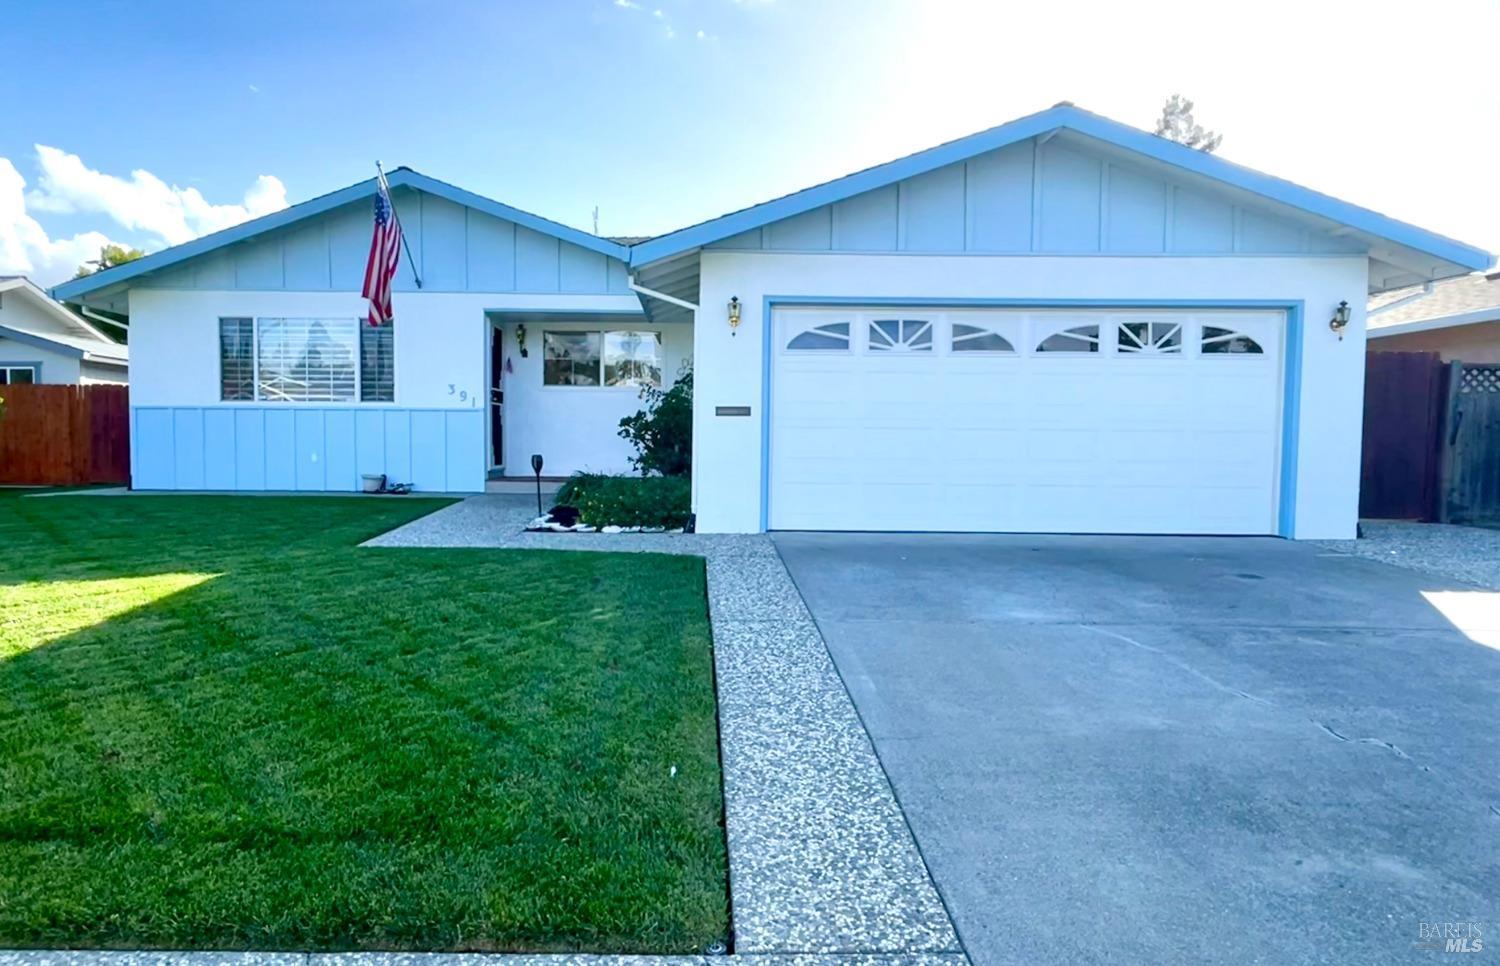 Photo of 391 Chelan Dr in Vacaville, CA